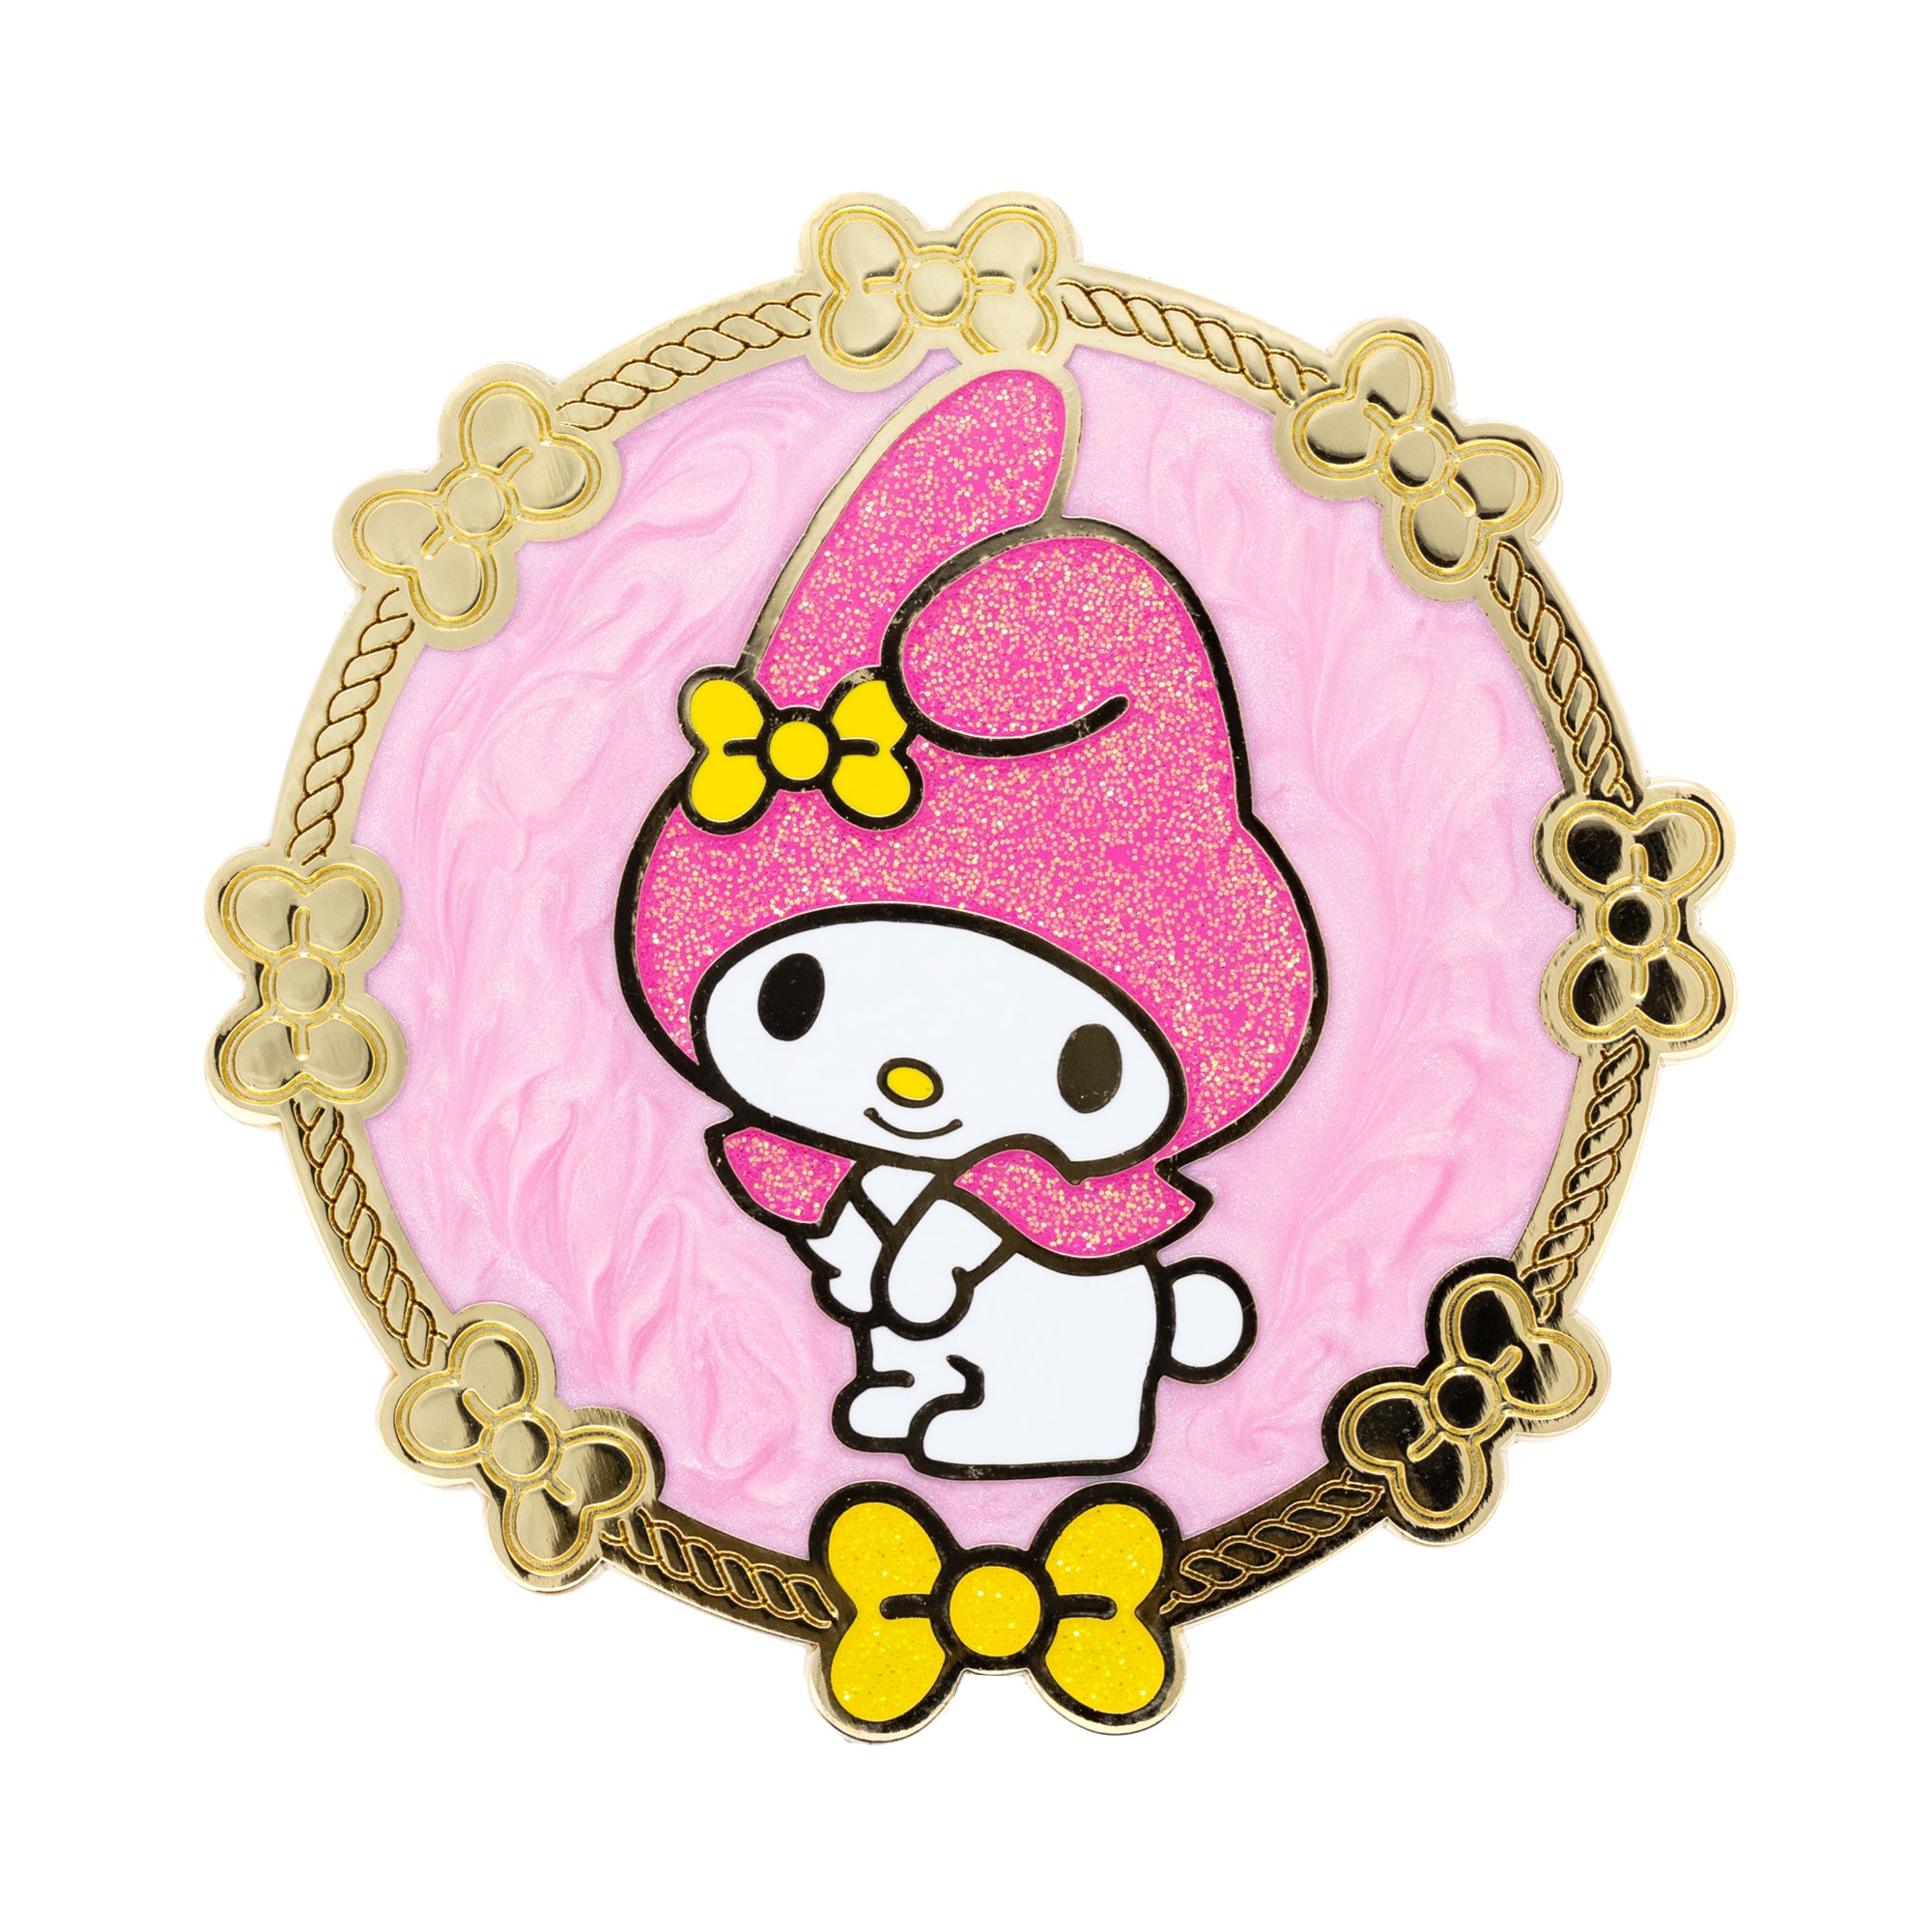 HELLO KITTY AND FRIENDS - MY MELODY 893 FIGPIN